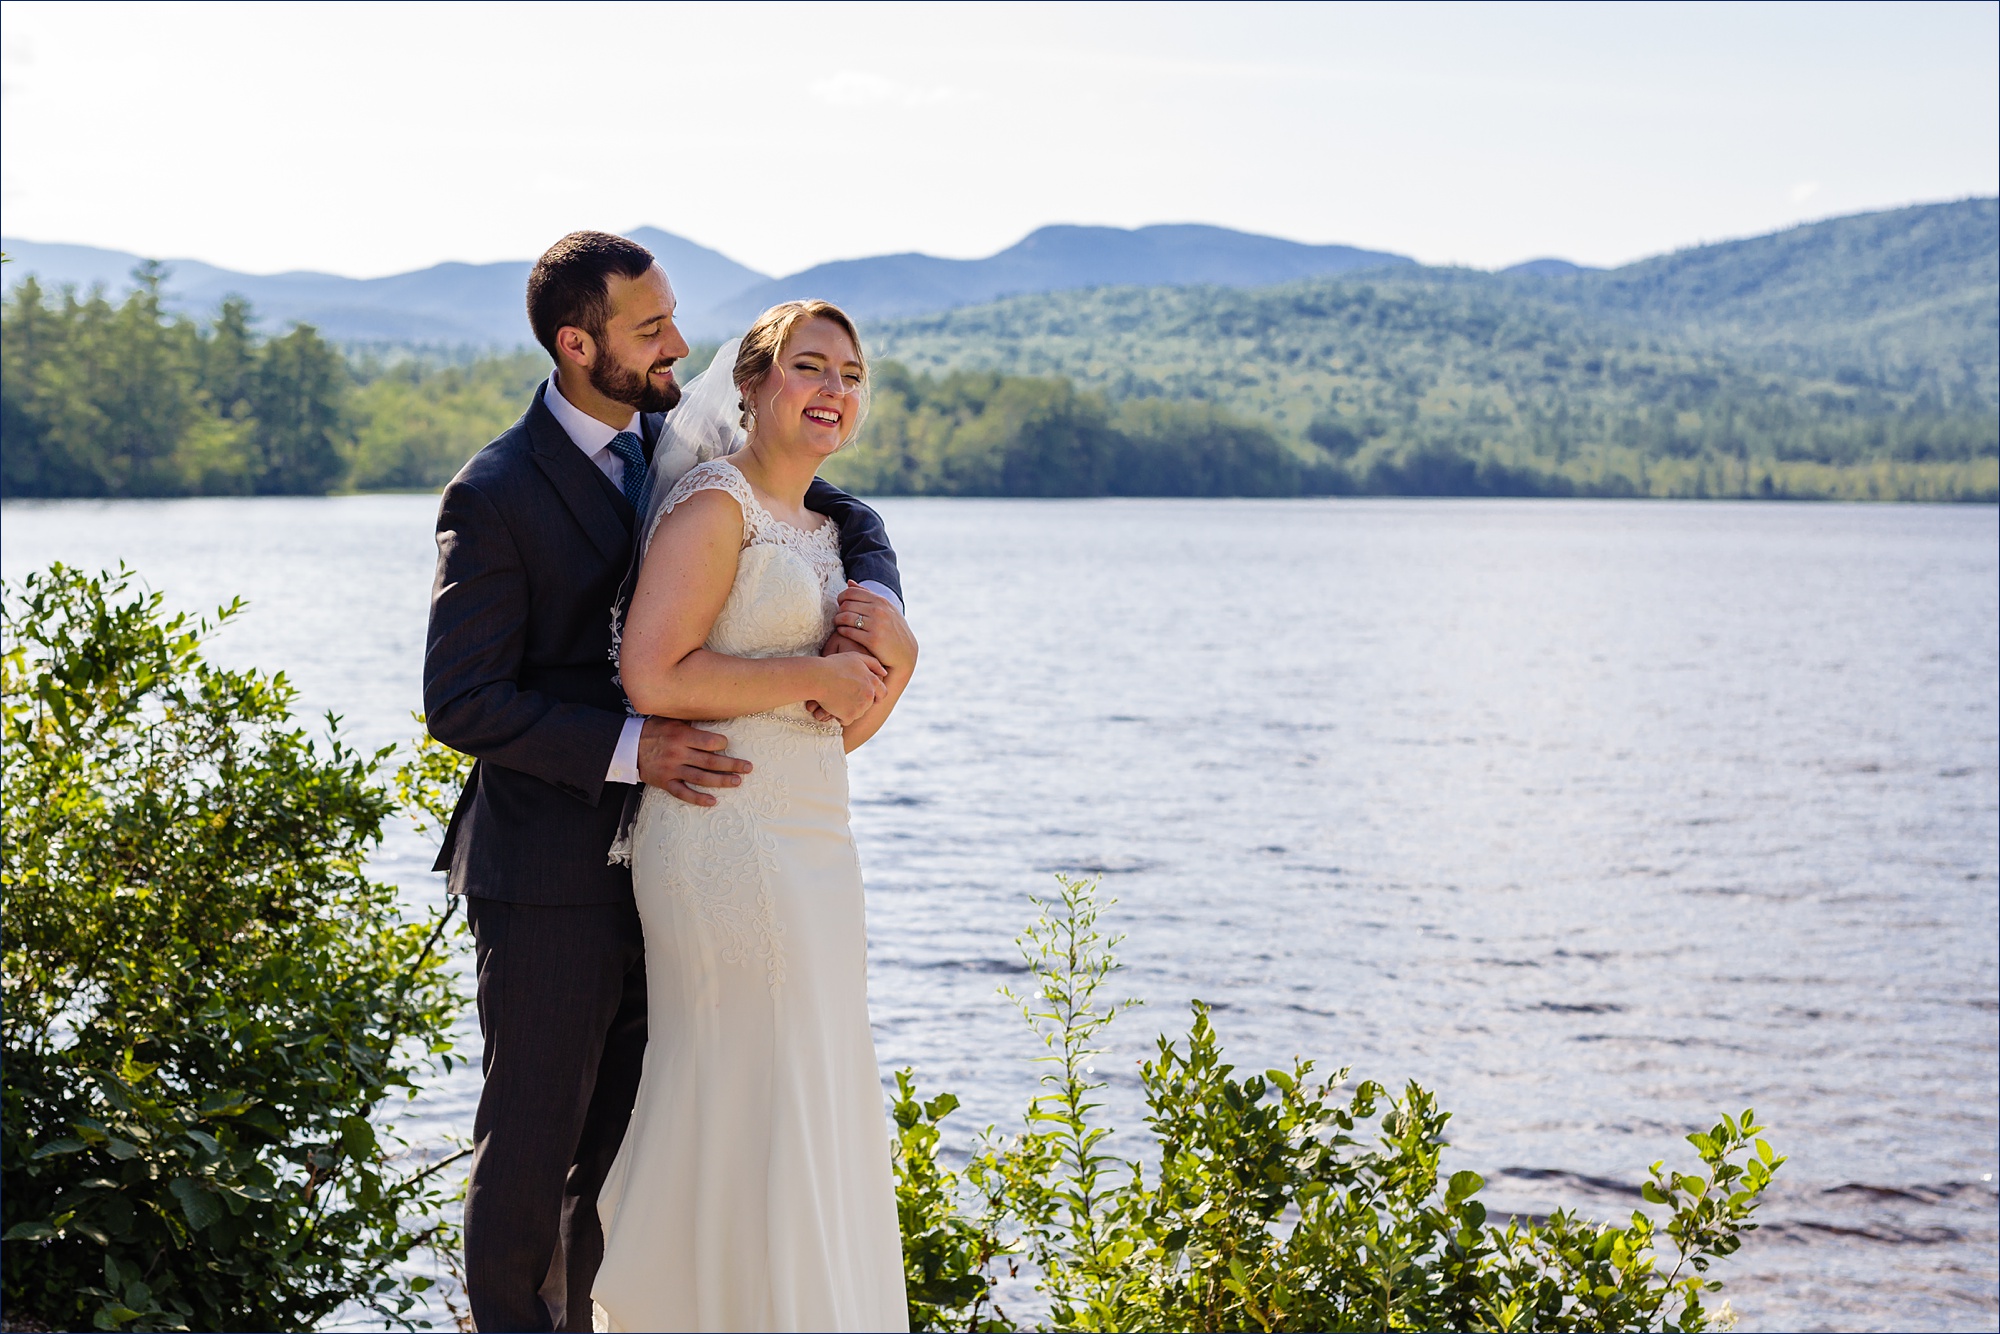 The bride and groom share a laugh after their ceremony in front of Mount Chocorua and Chocorua Lake in New Hampshire